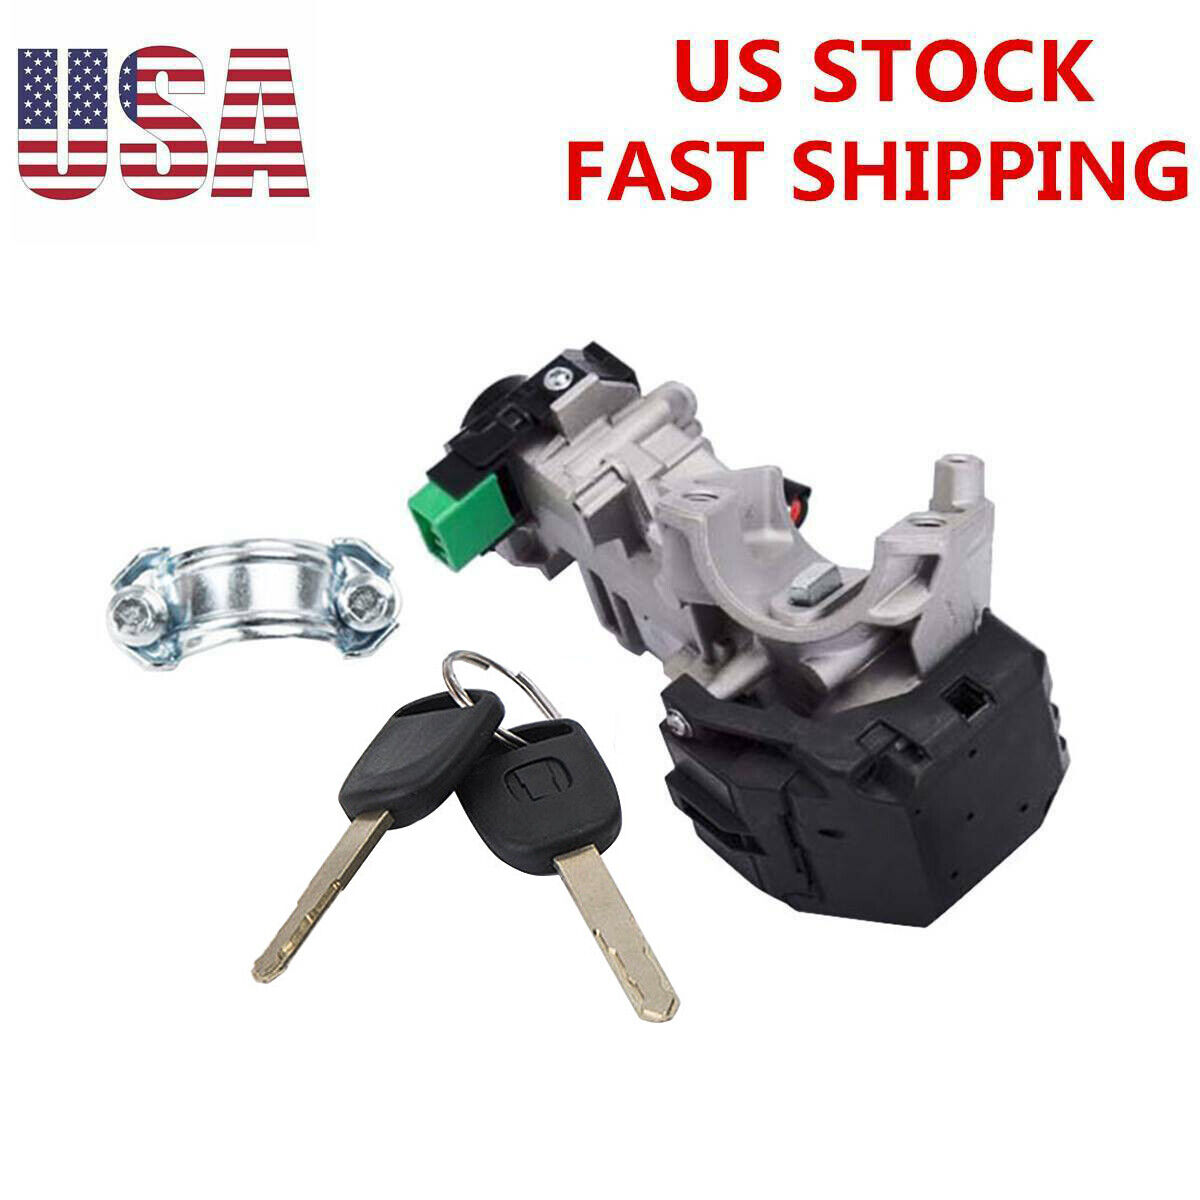 Ignition Switch Cylinder Lock Trans For 03-11 Honda Accord CRV Fit Civic Odyssey